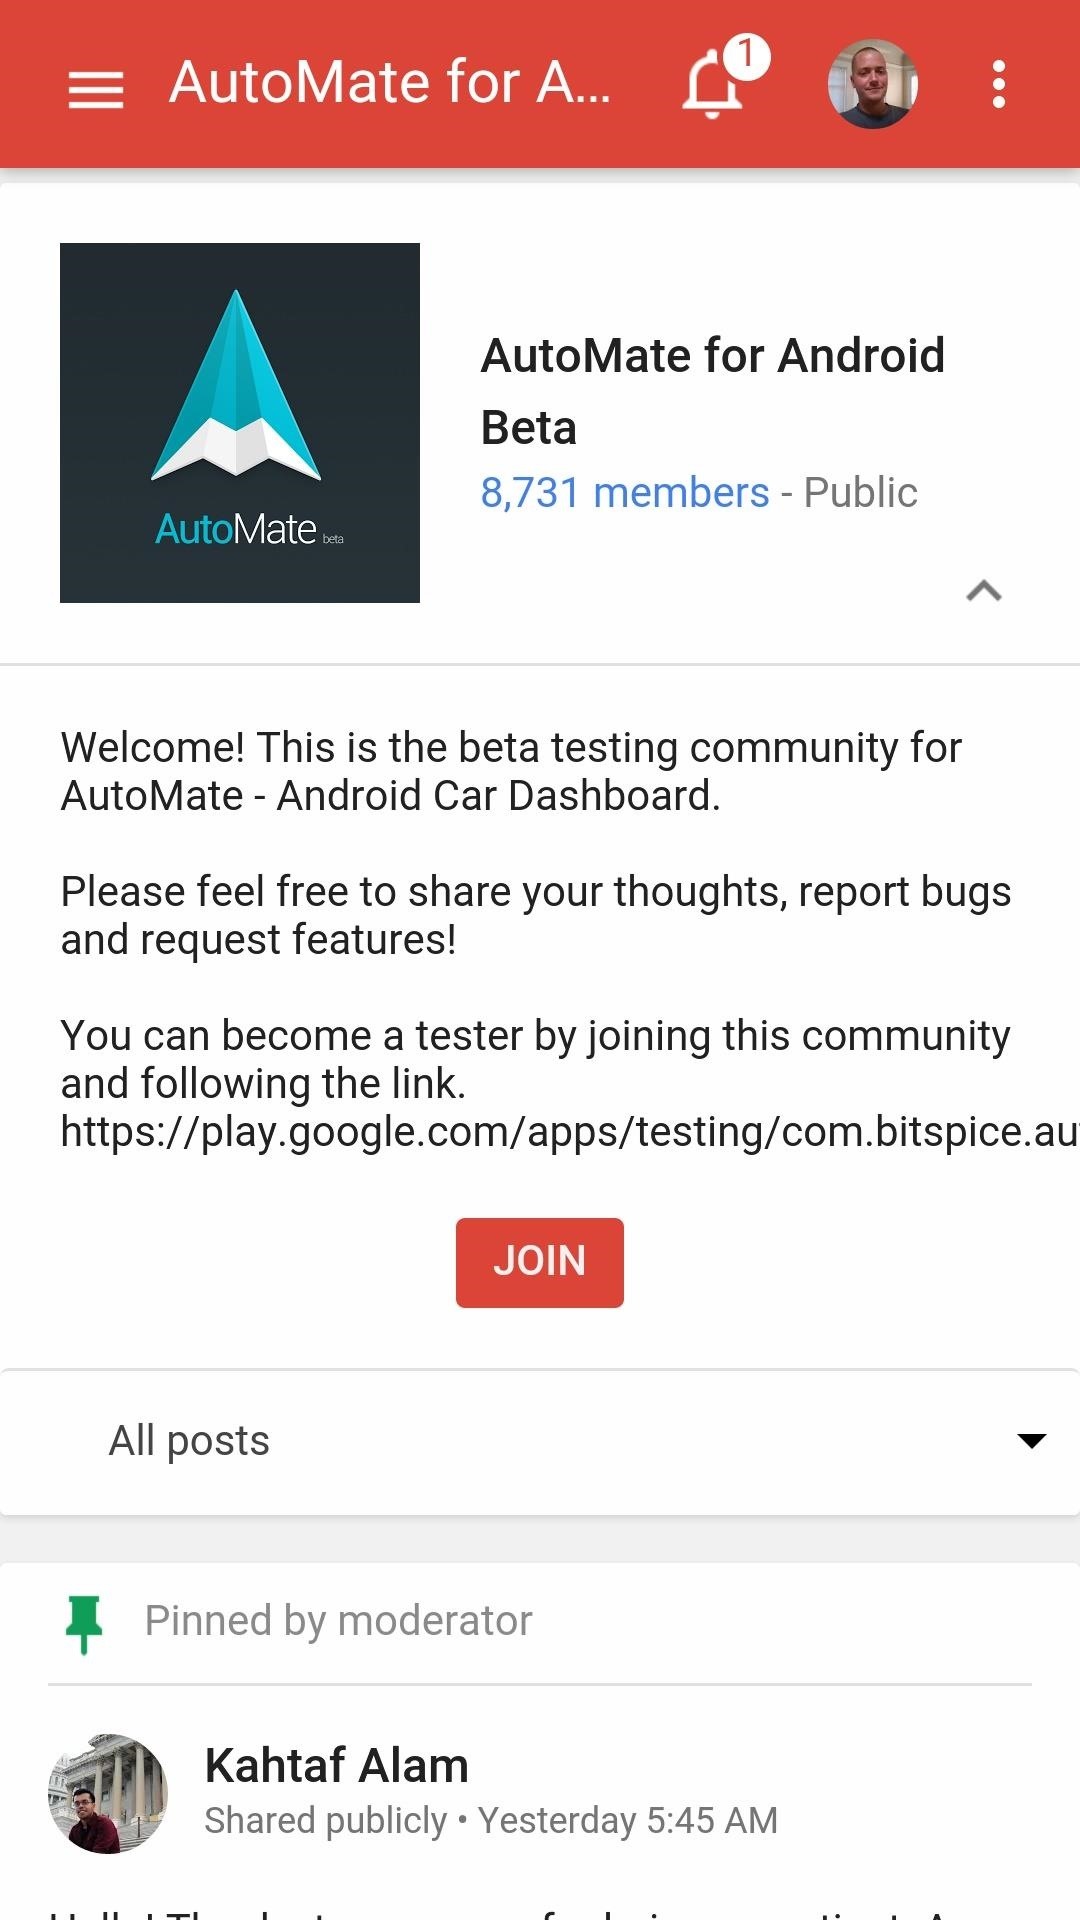 How to Turn Your Device into an Android Auto Clone